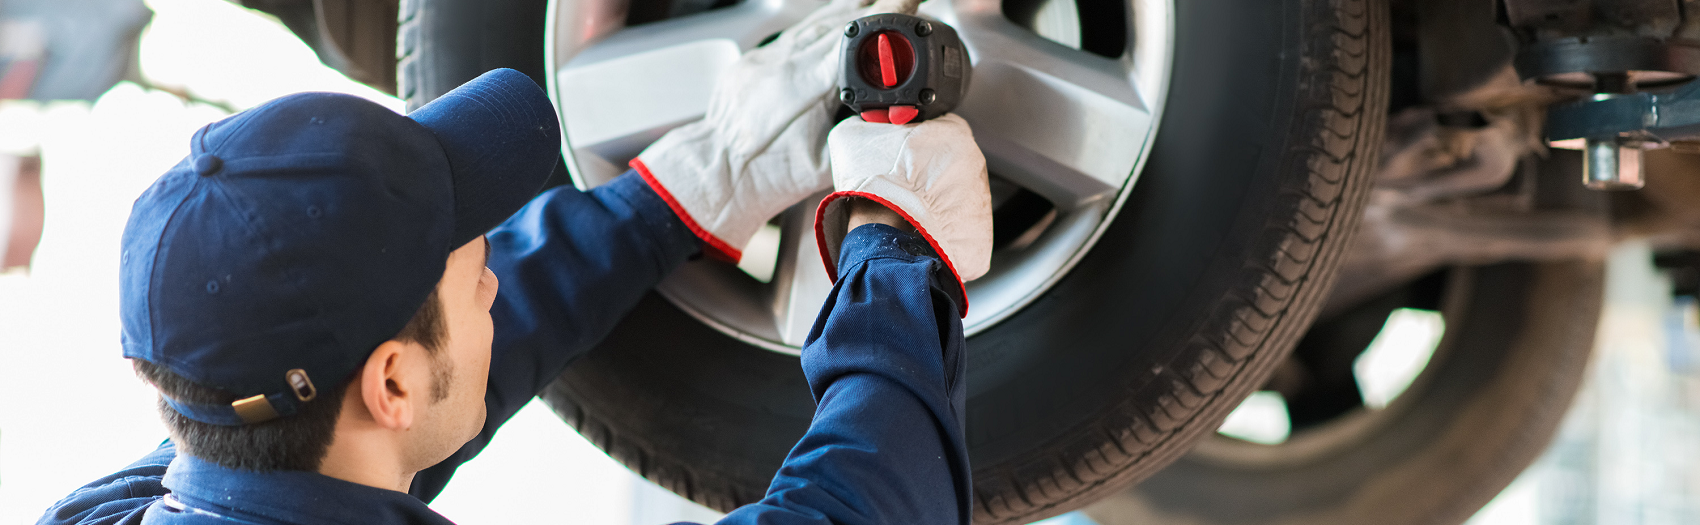 Importance of Tire Pressure